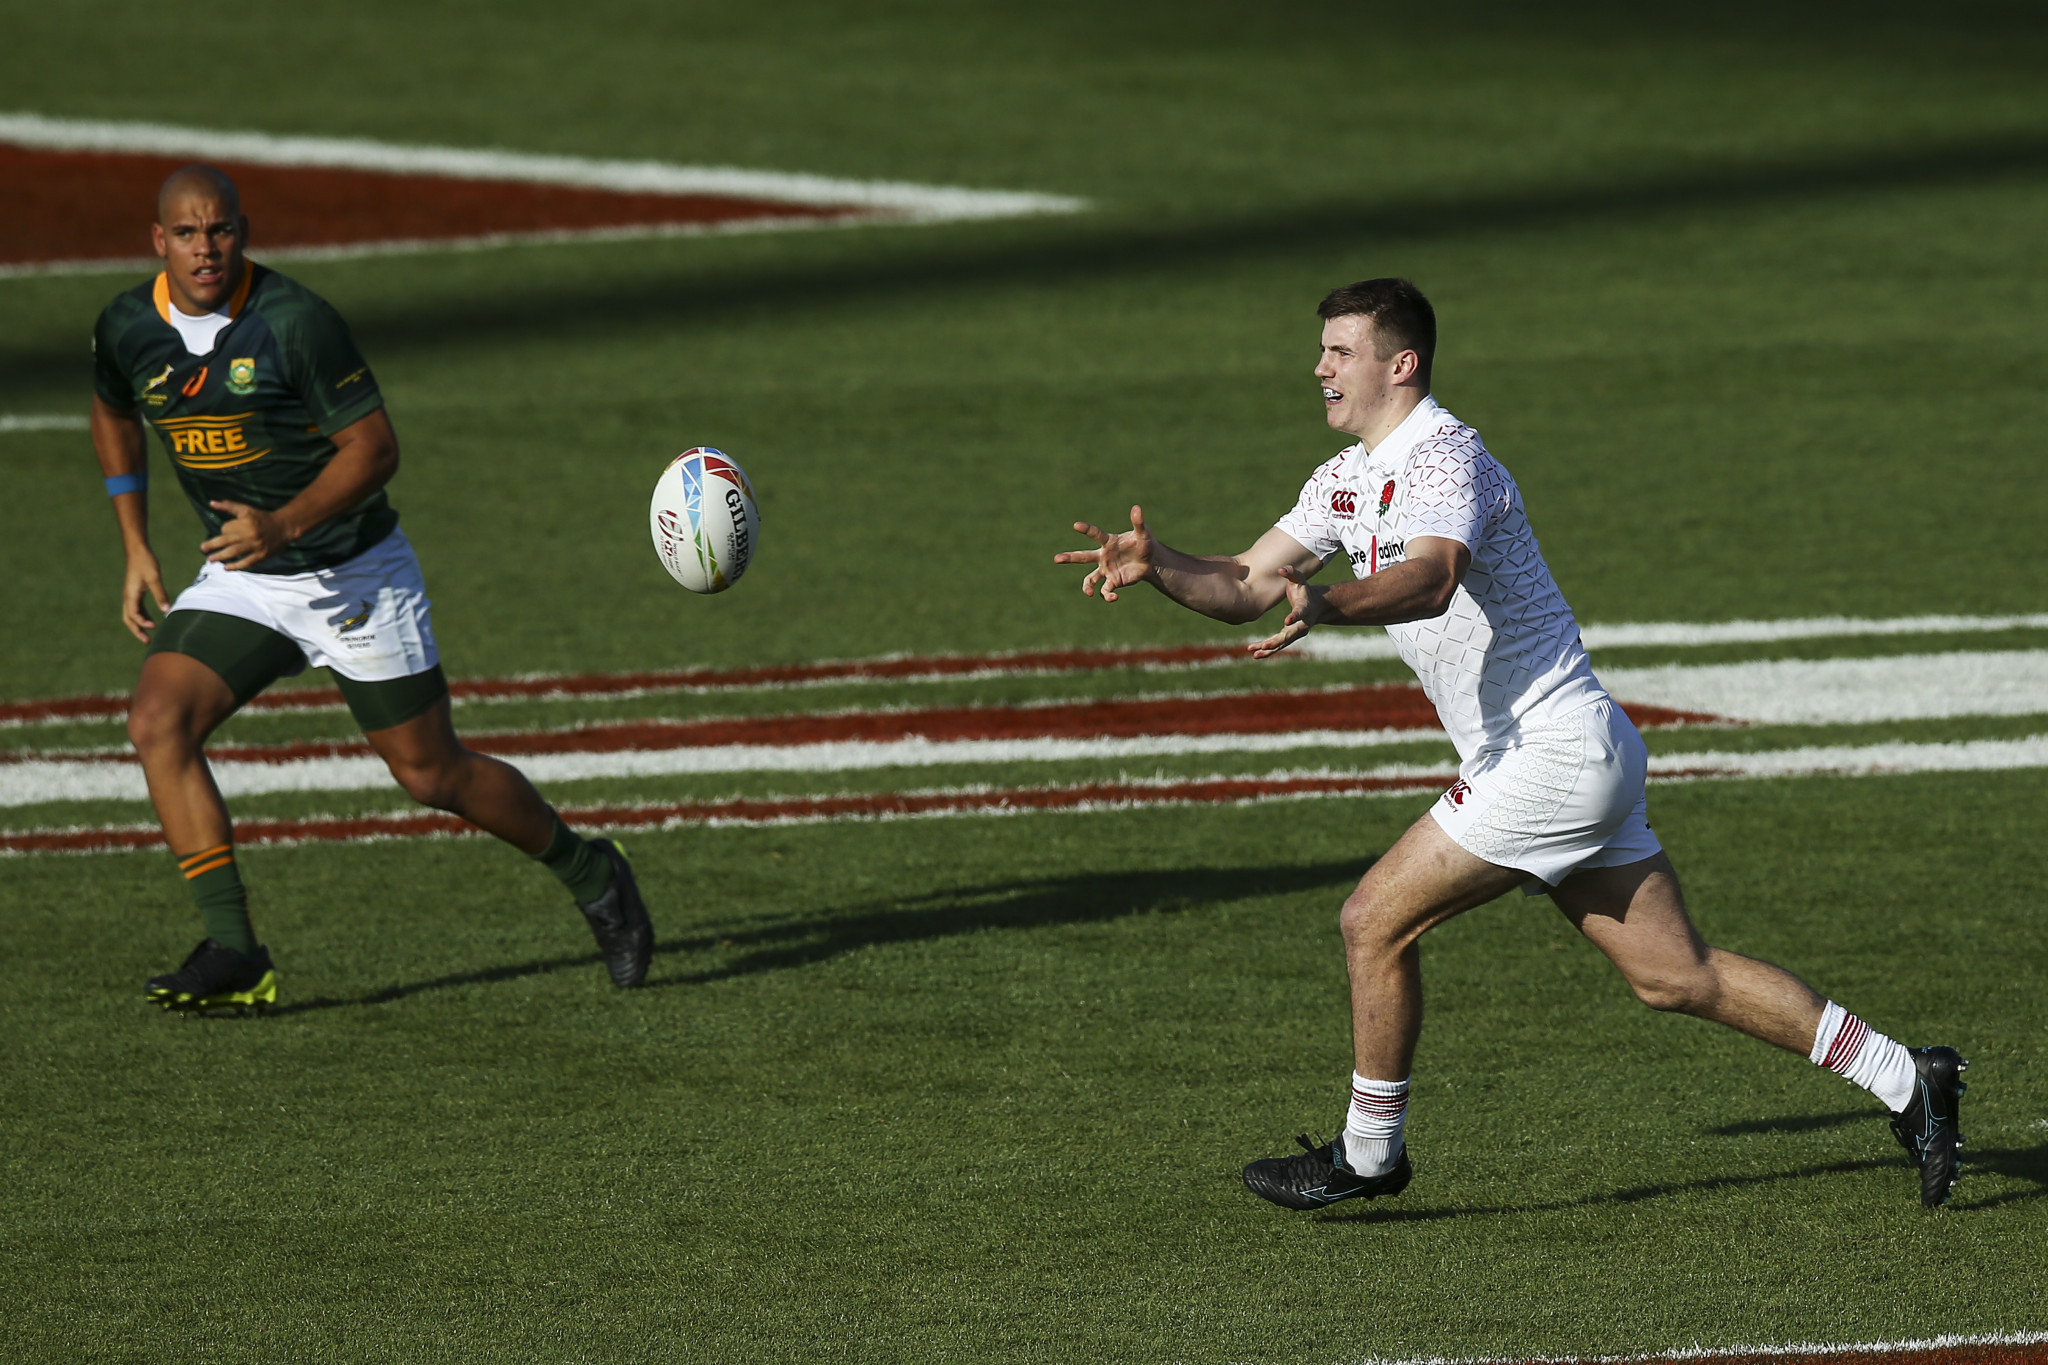 England first side through to semi-finals in World Rugby Men's Sevens Series